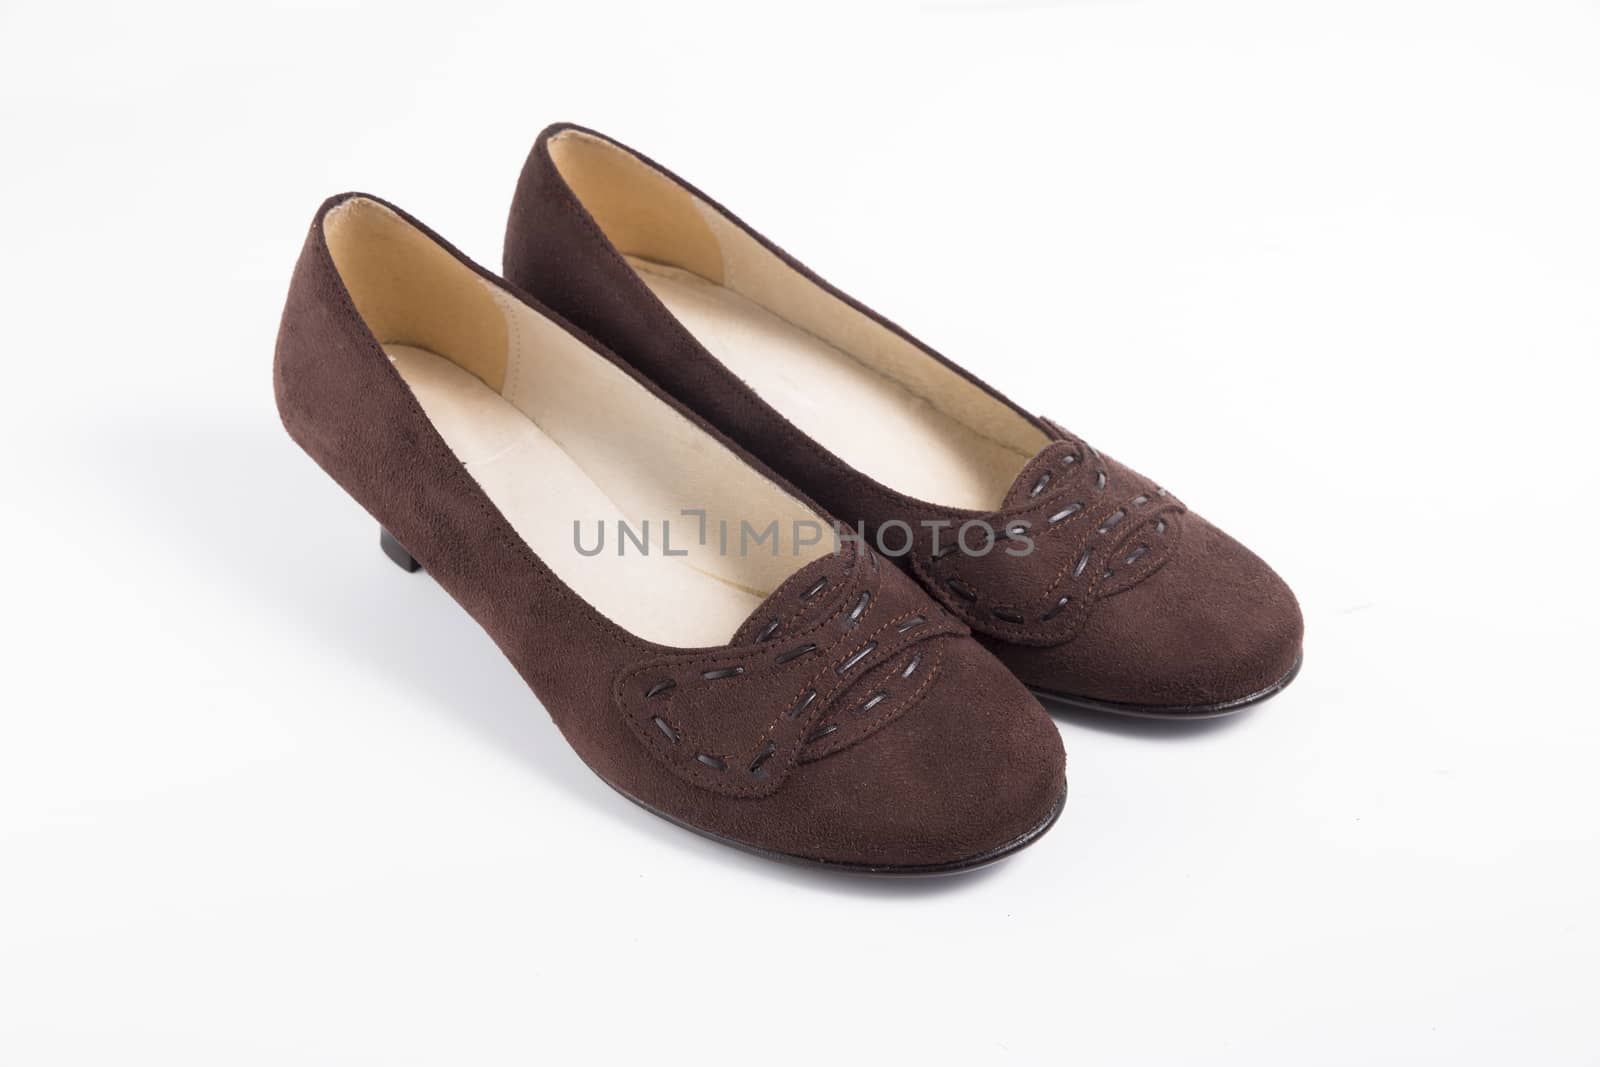 Pair of brown shoes on white background, isolated product.